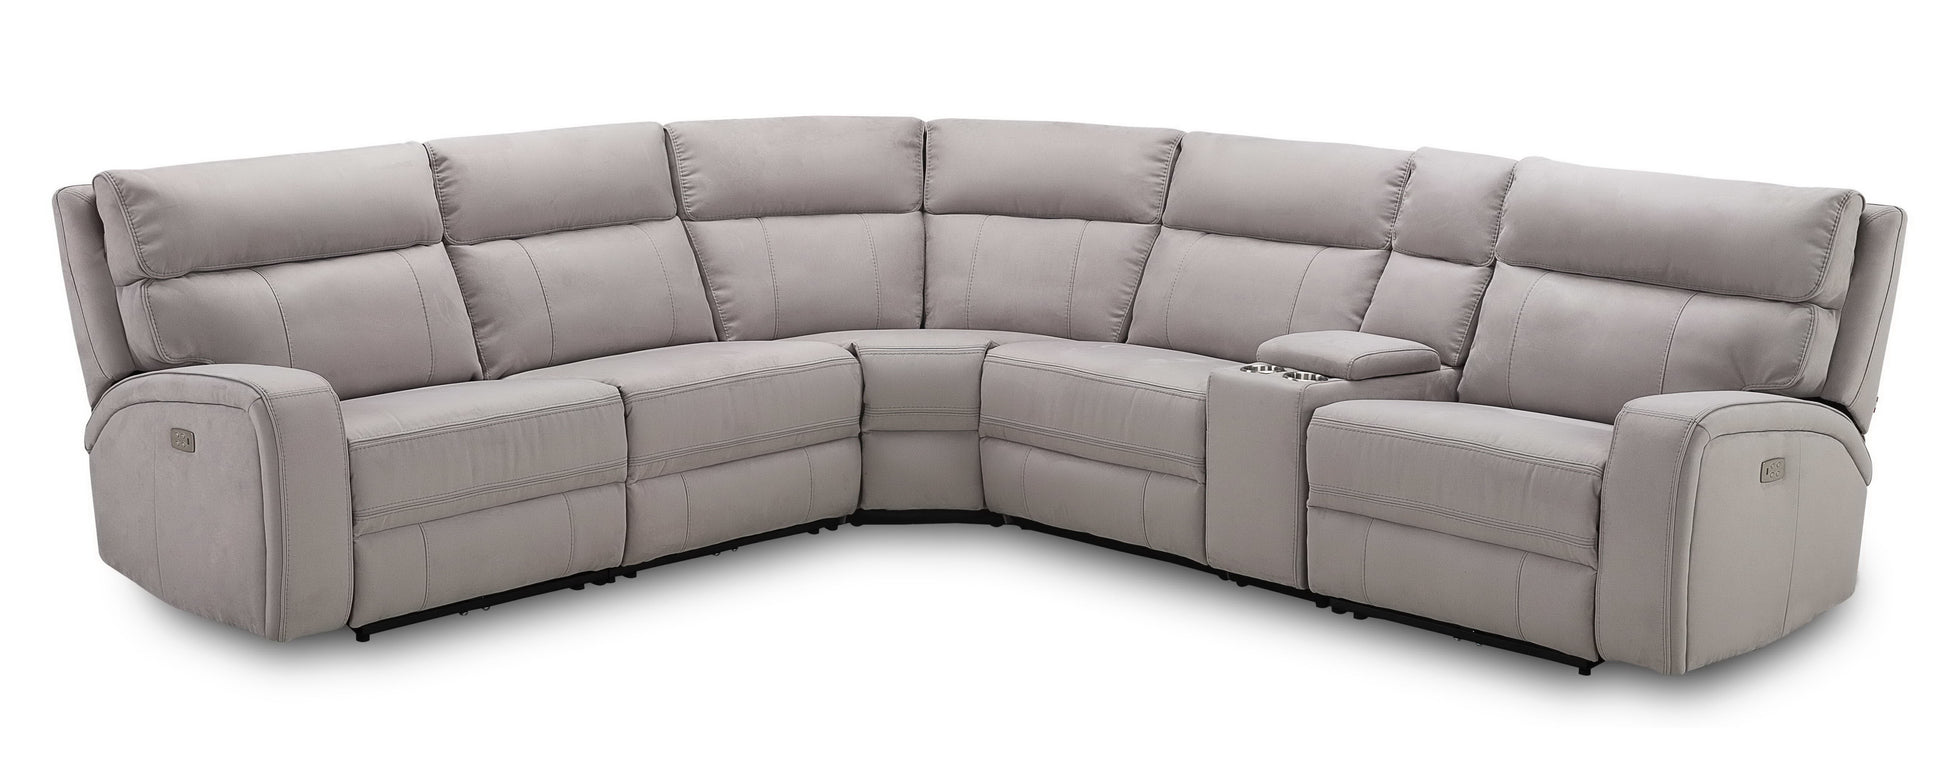 Cozy Motion Sectional Sofa Moonshine by JM